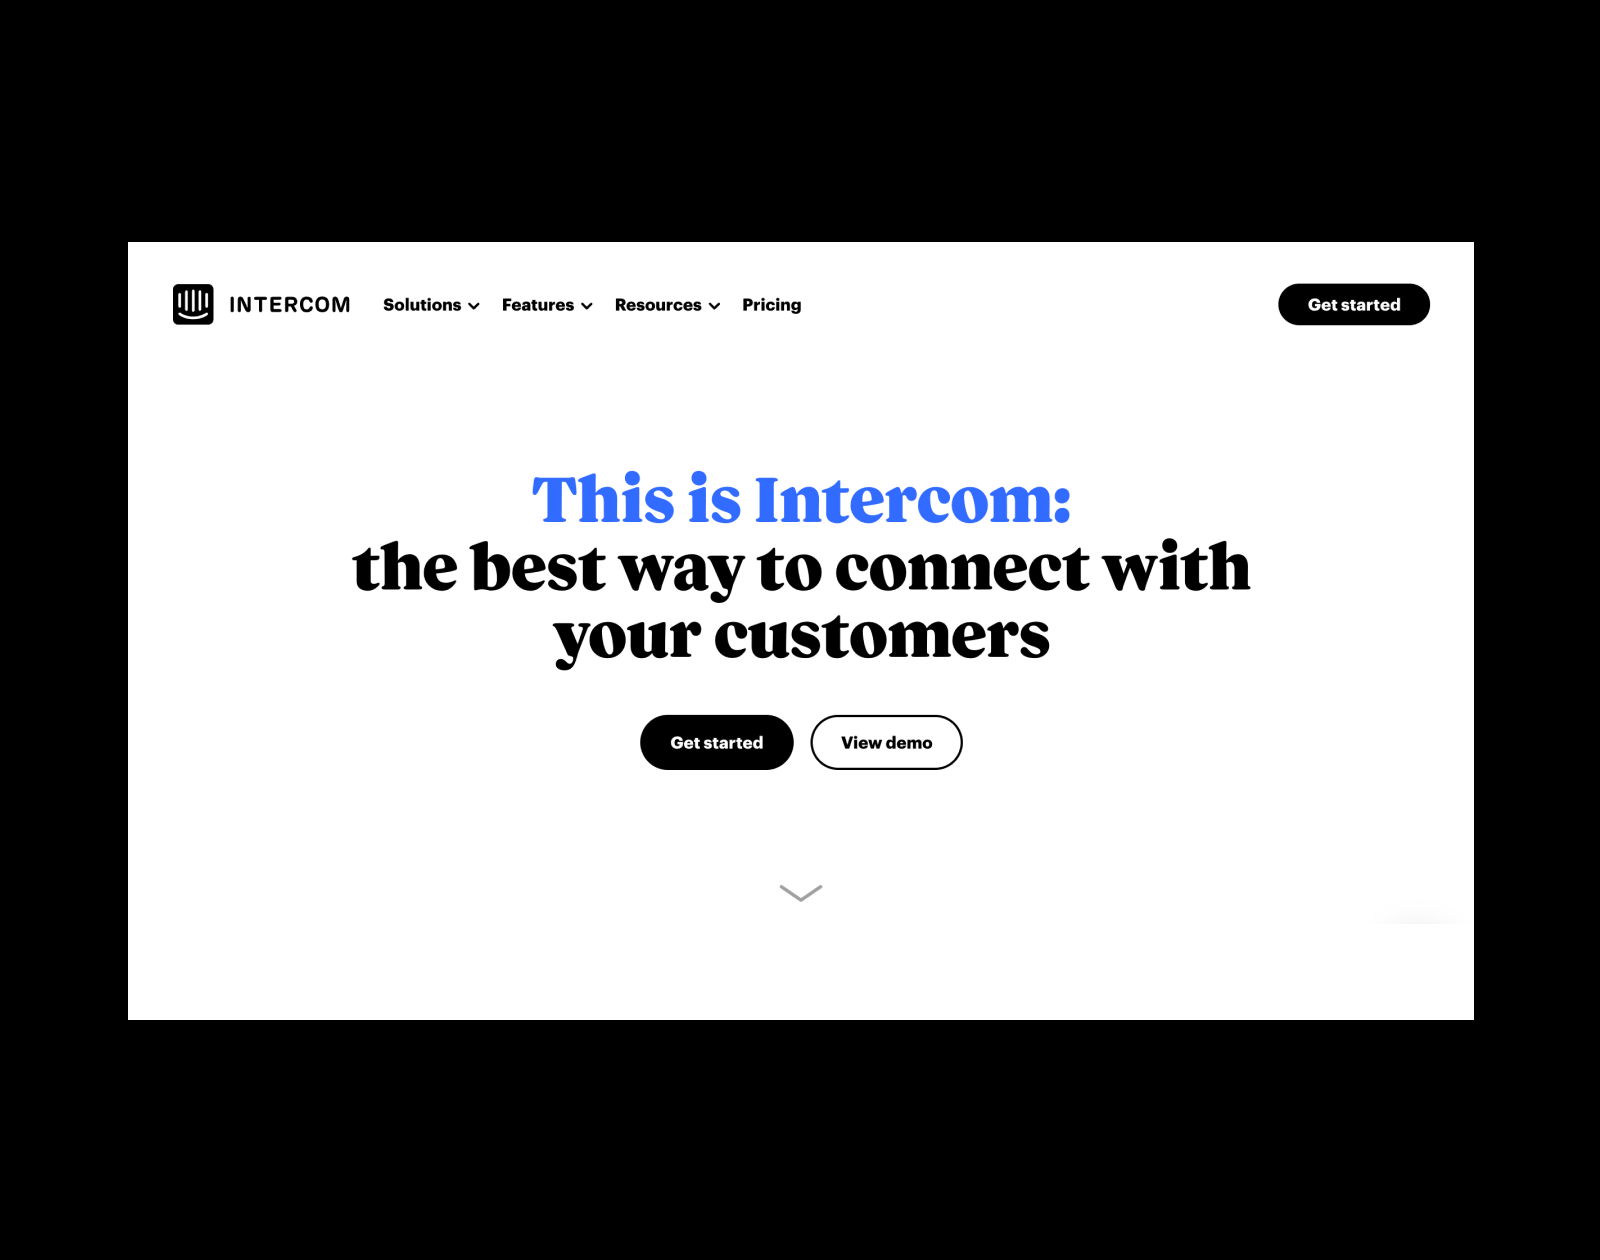 Intercom is an American software company that produces a customer messaging platform